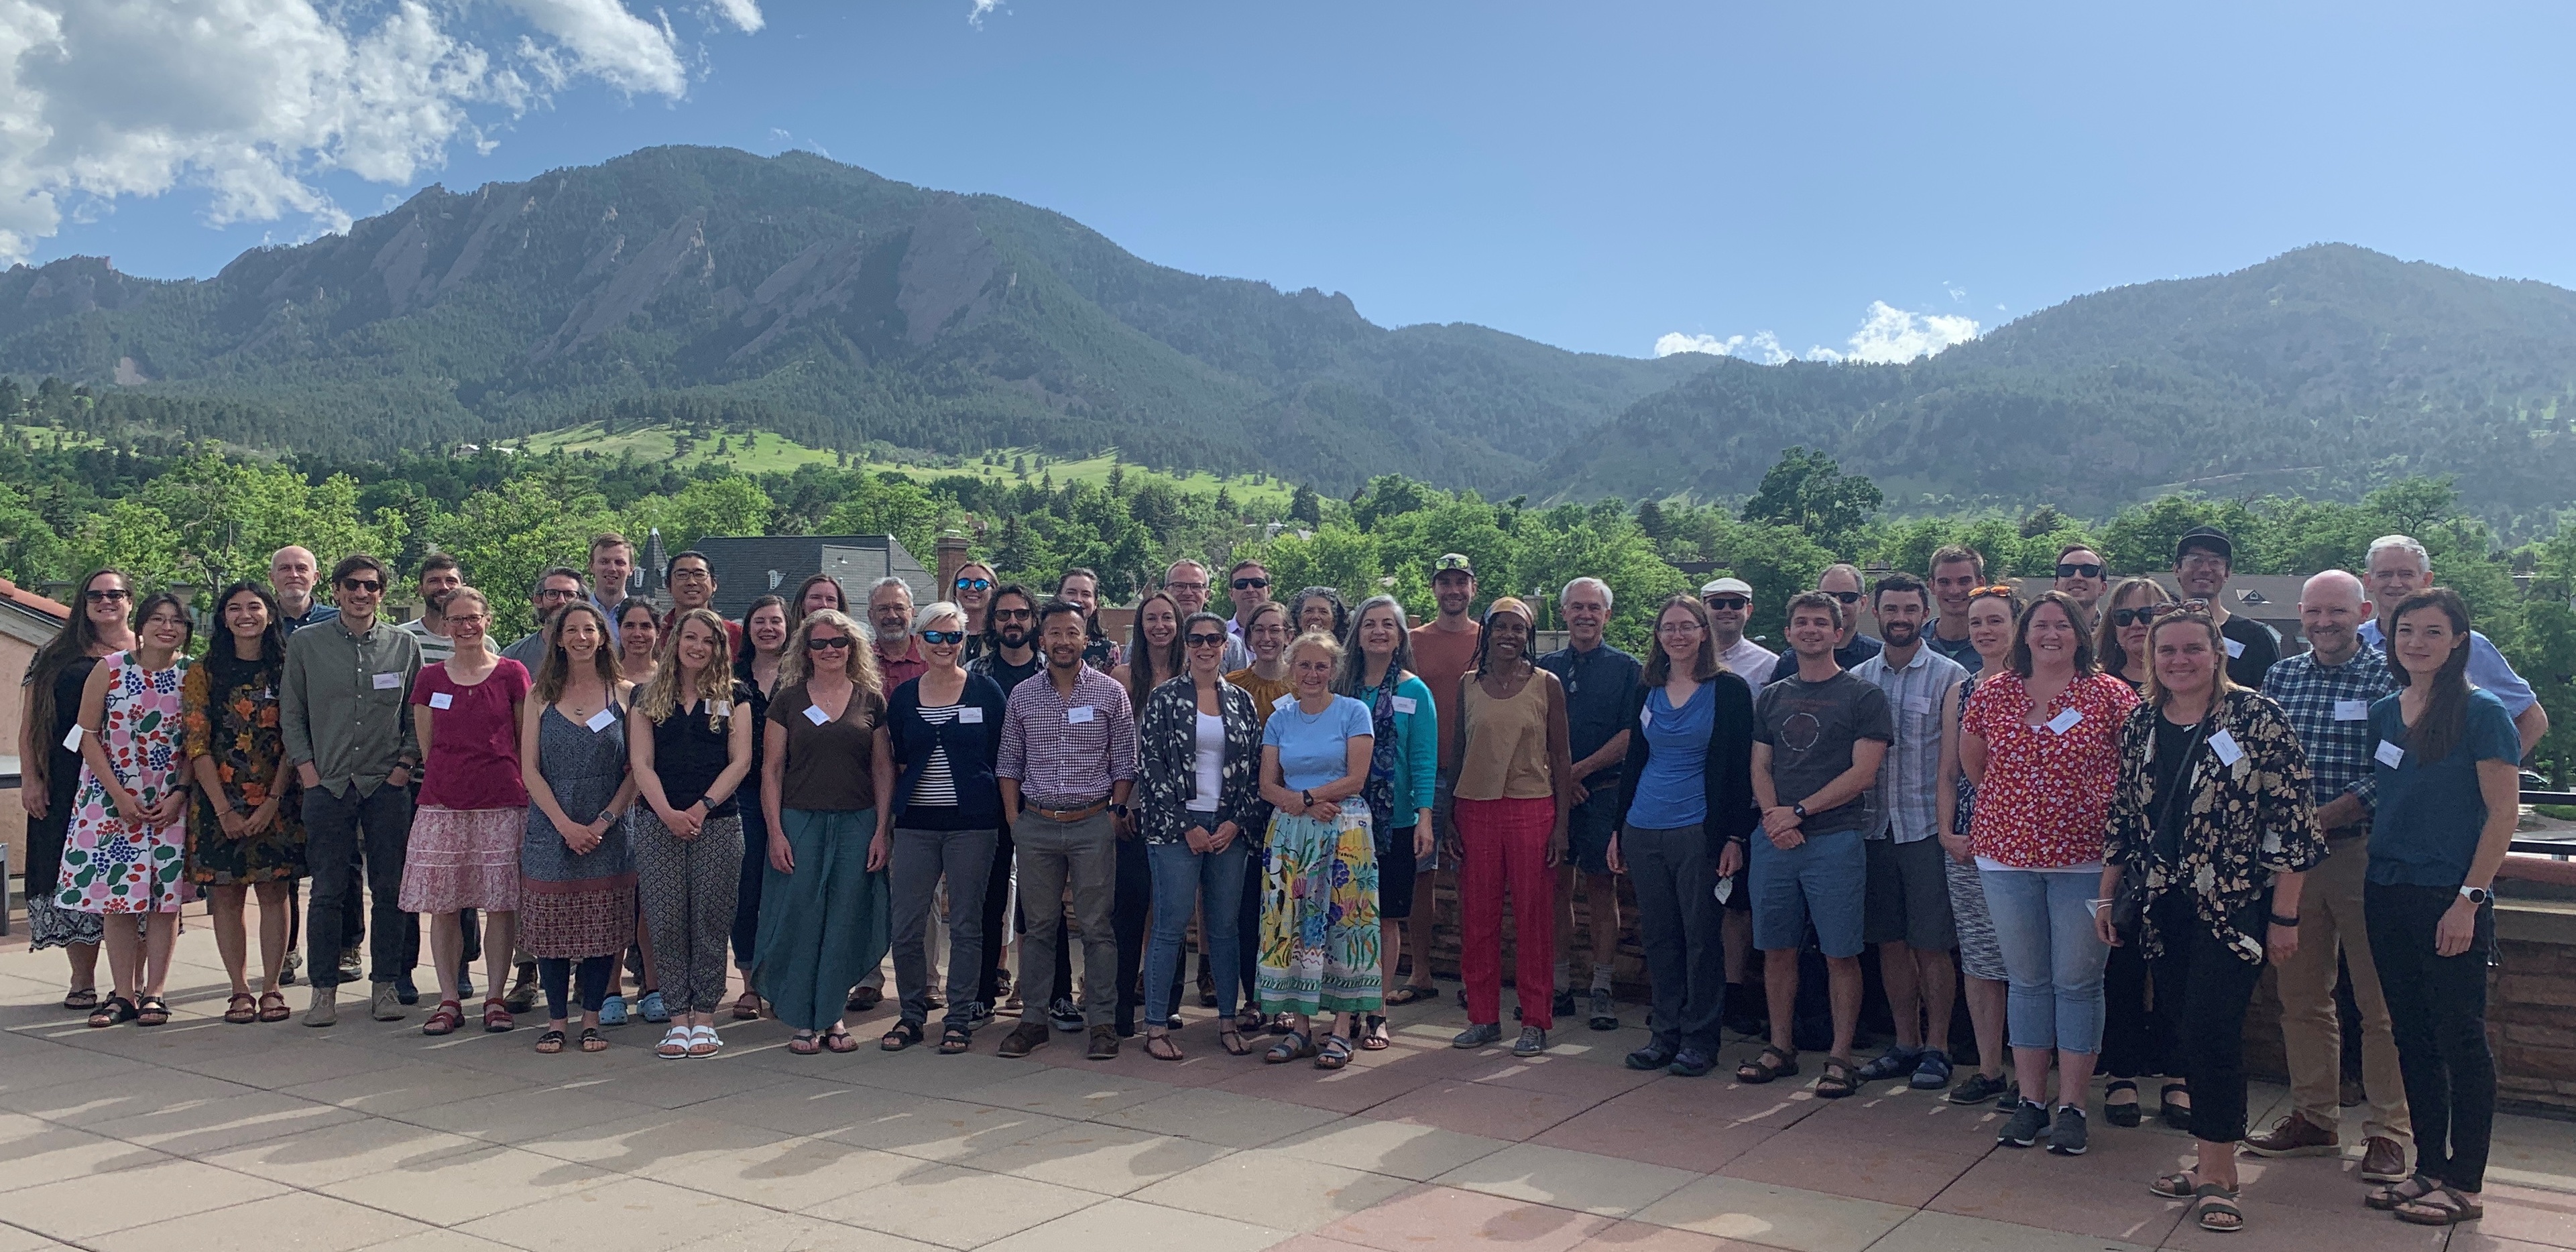 ITGC meeting attendees in Boulder, CO, USA, June 13, 2022